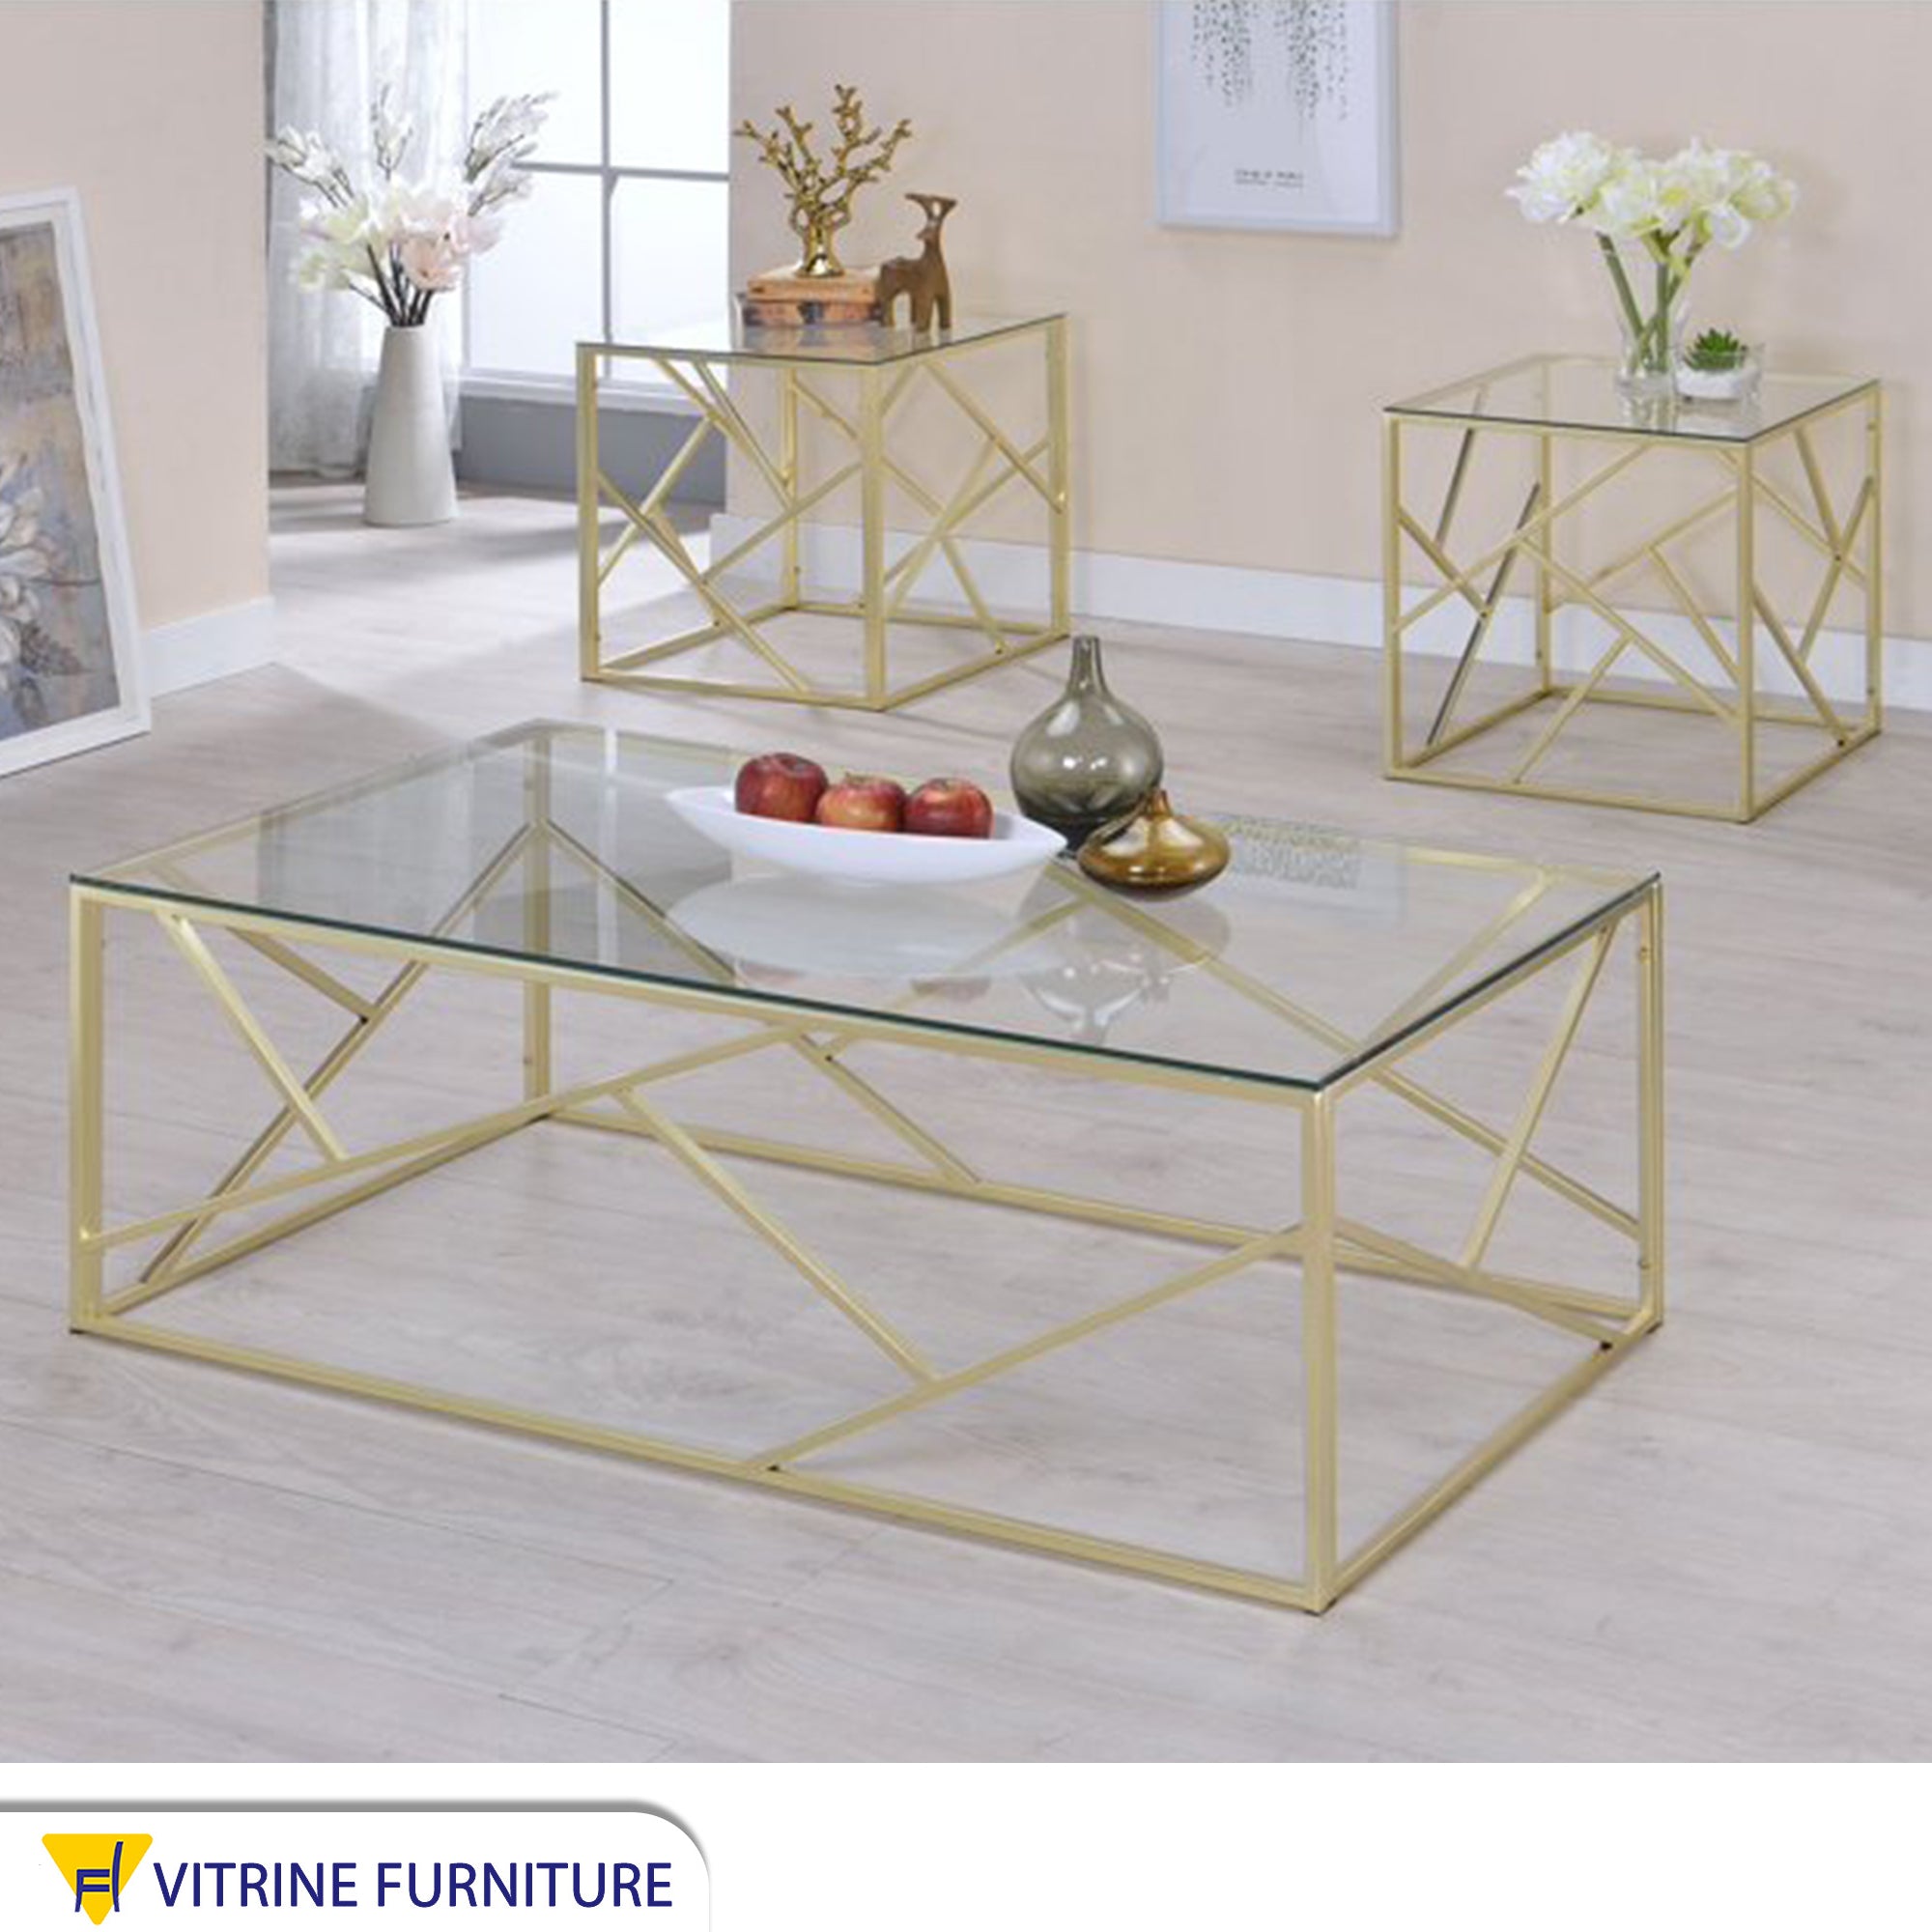 A set of tables in gold with a modern design